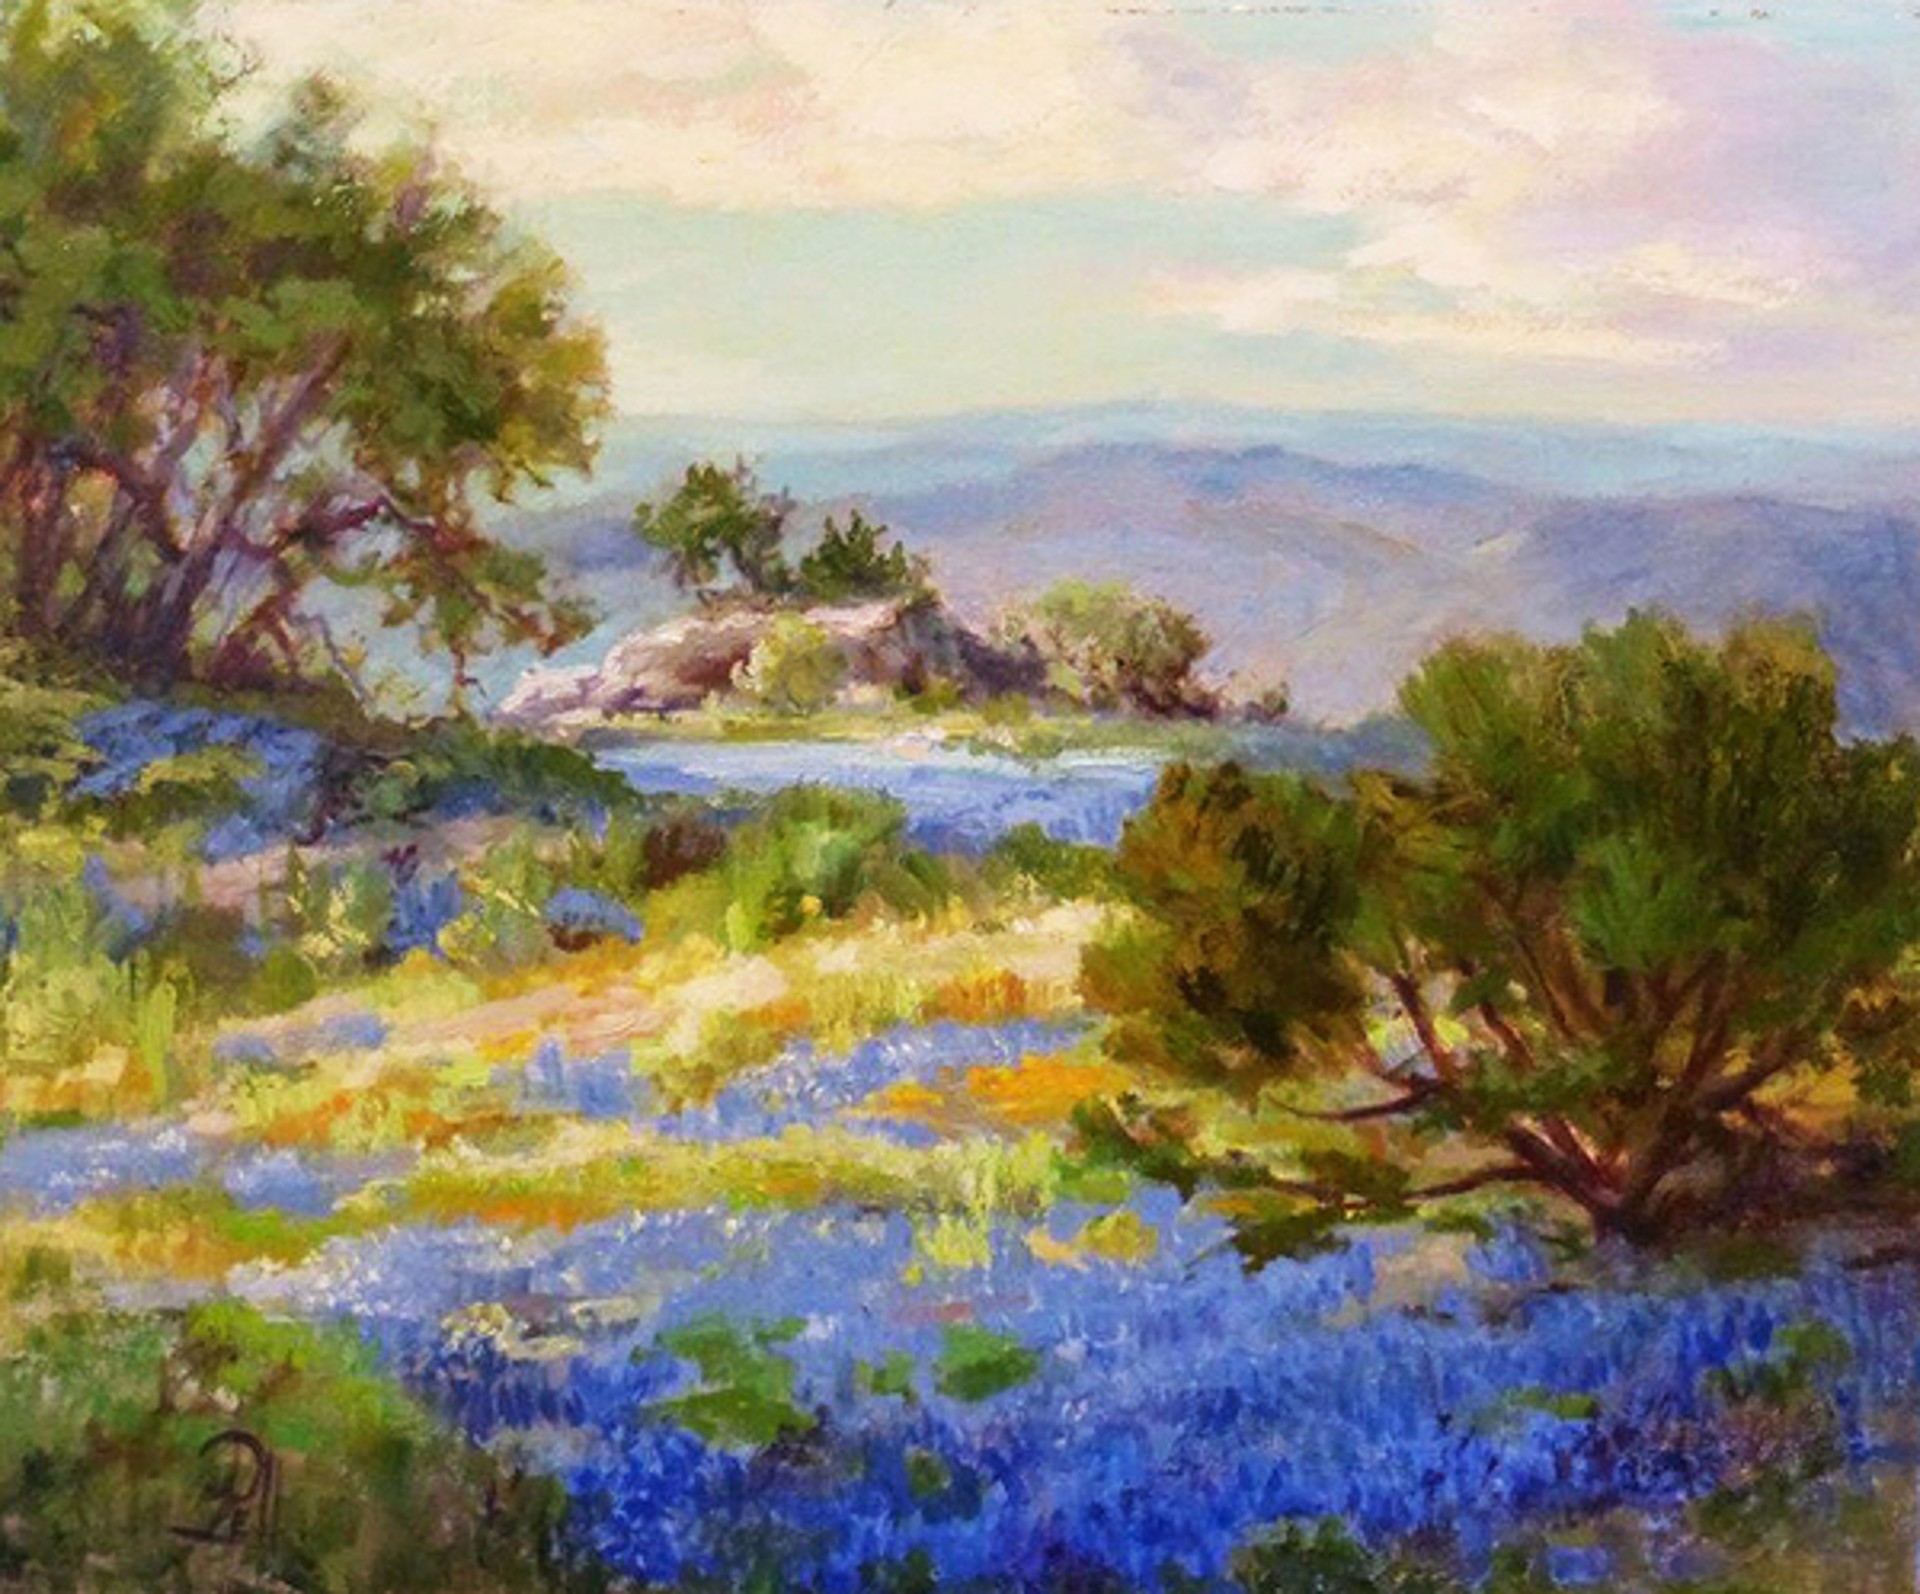 Bluebonnets On The Edge by Lilli Pell